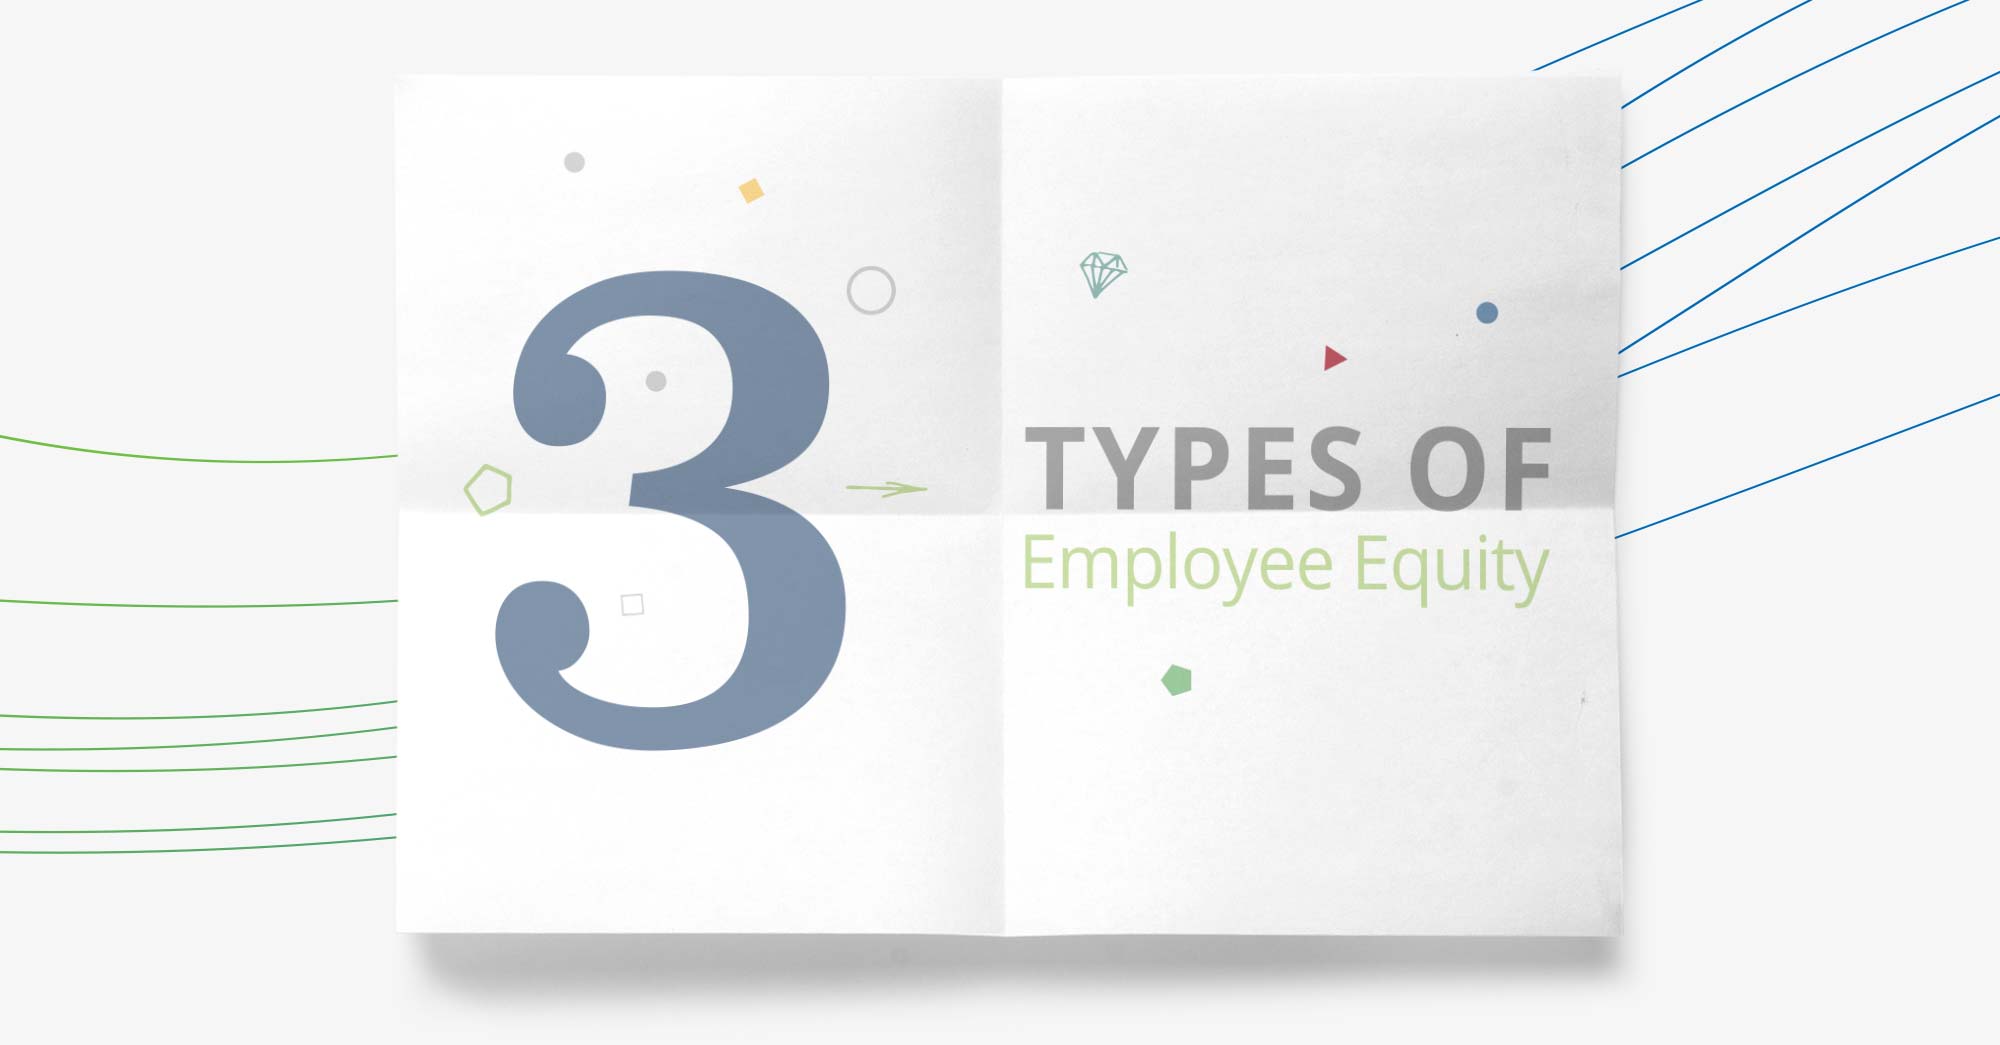 The three types of employee equity to understand and consider